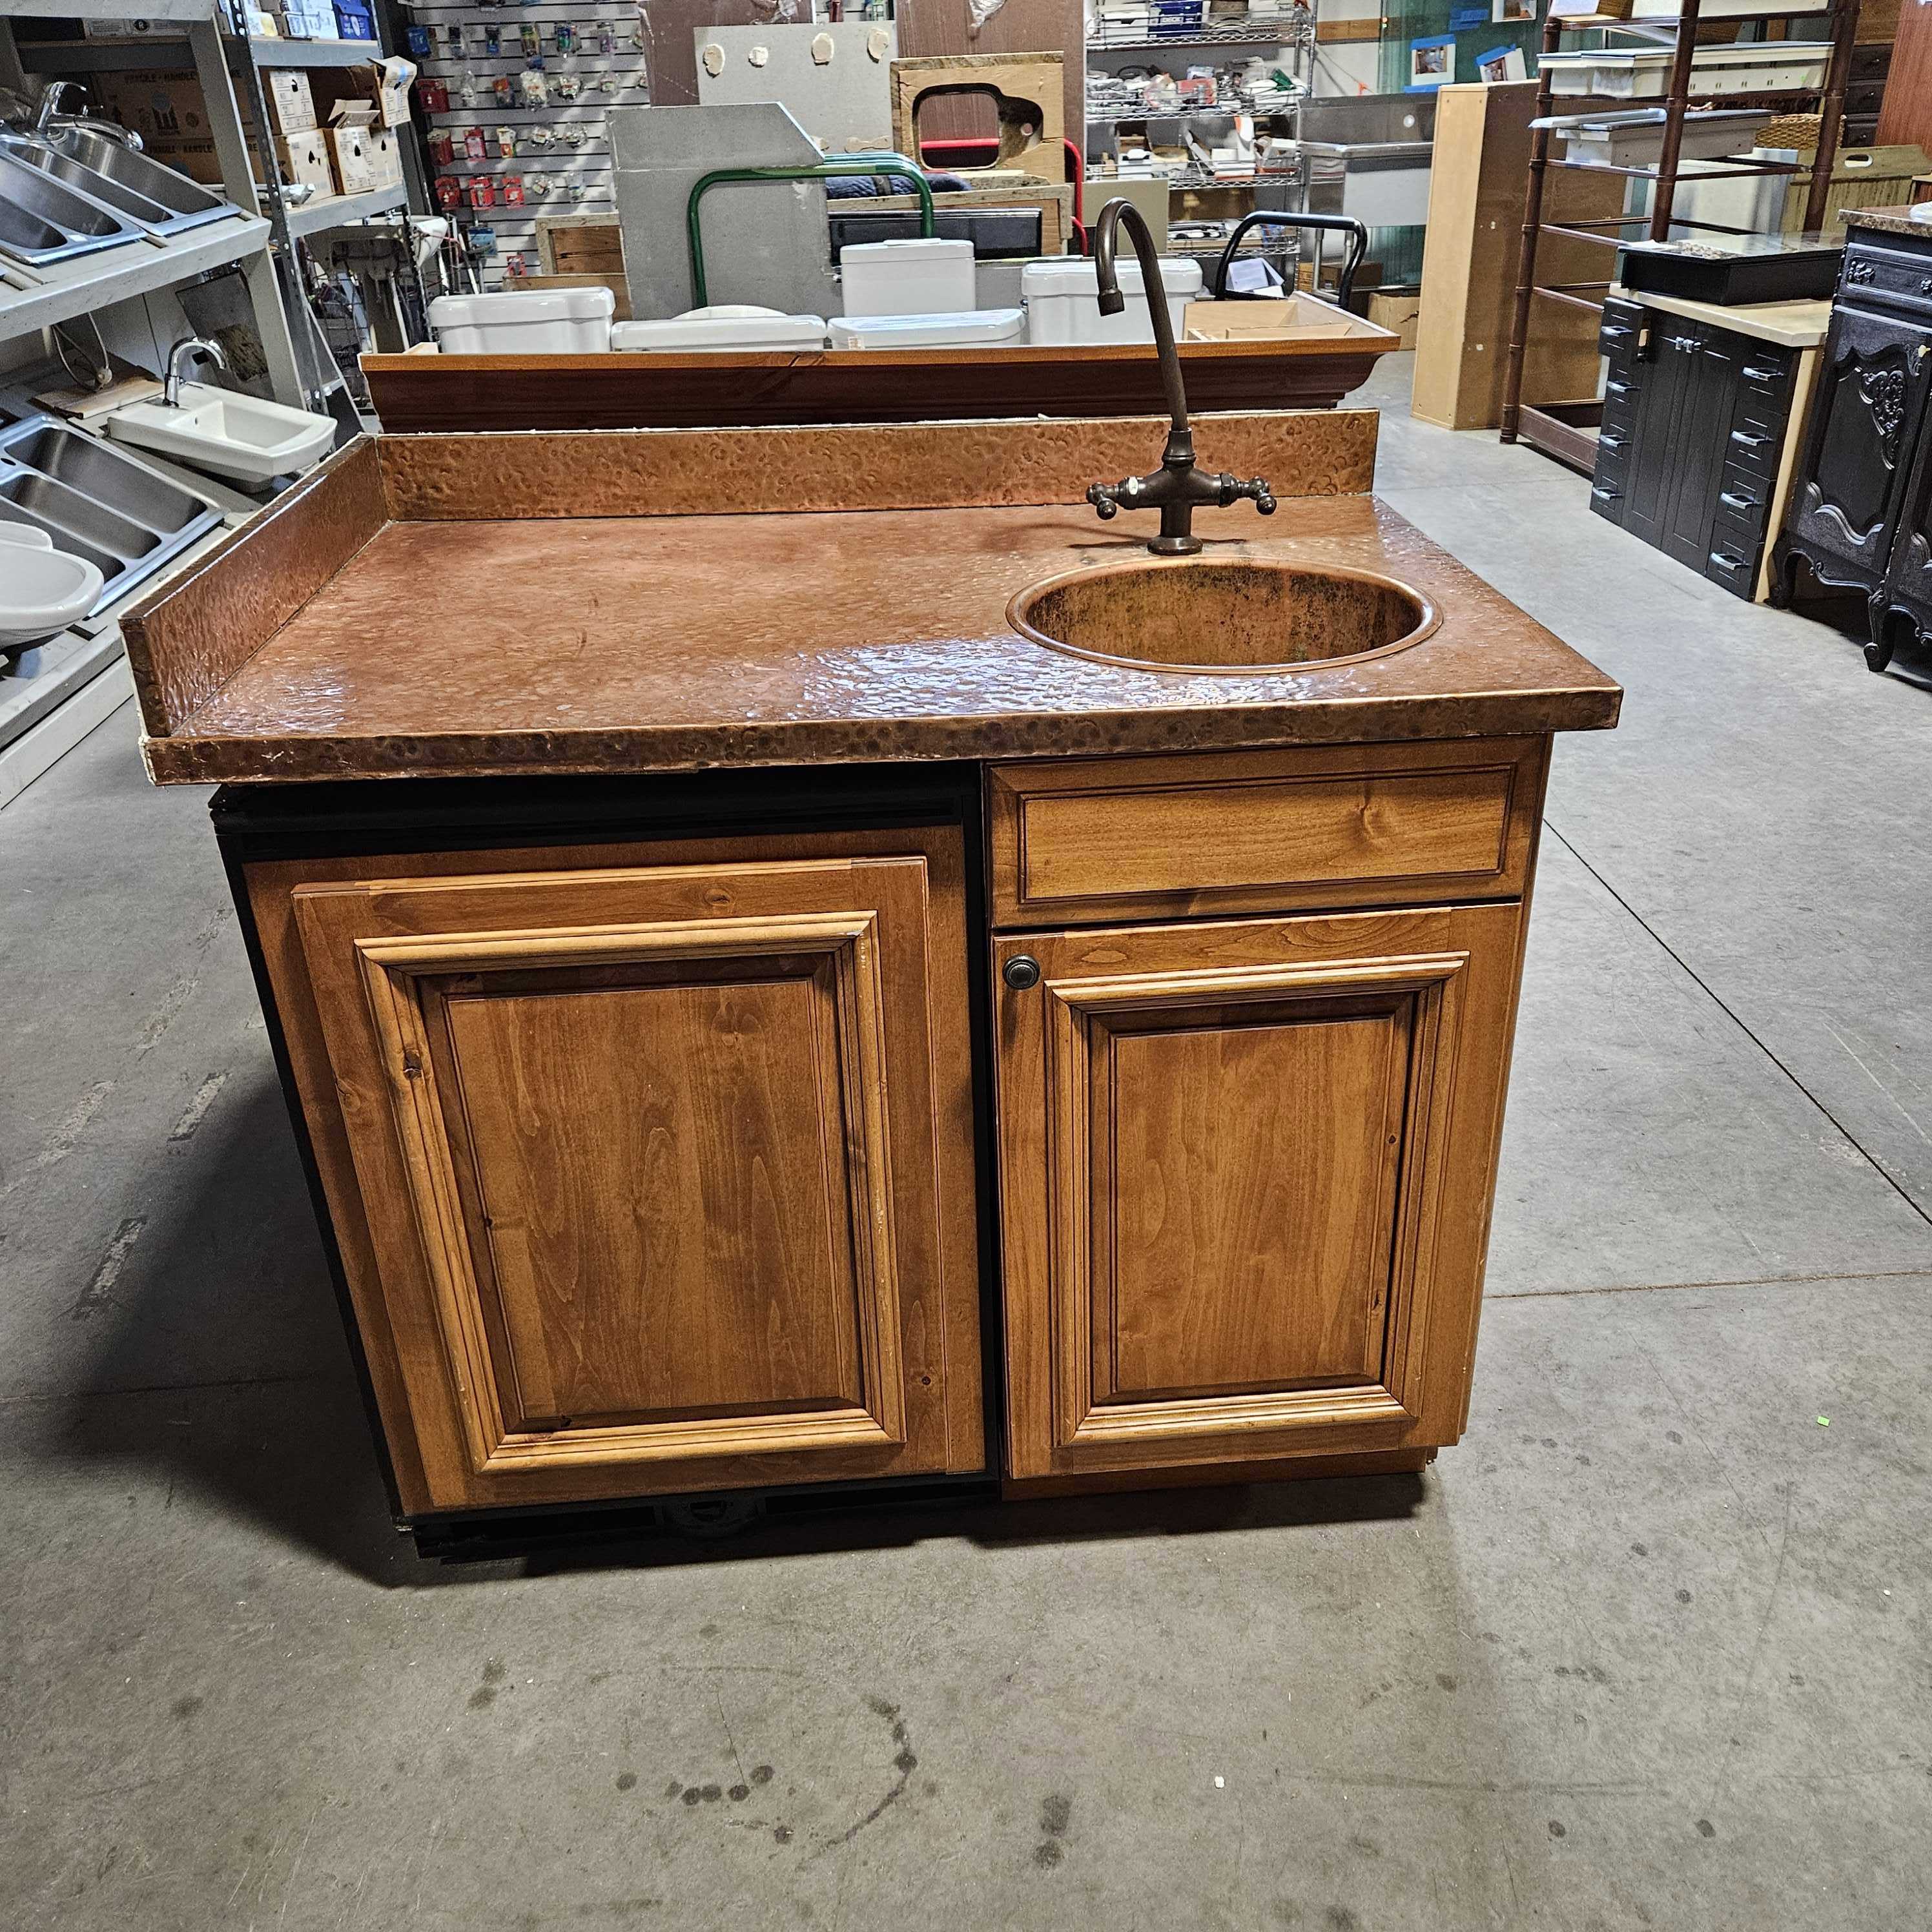 4 Pc Cherry Wood 1 Upper, 1 Lower Uline Under Counter Fridge Copper Countertop with Copper Sink